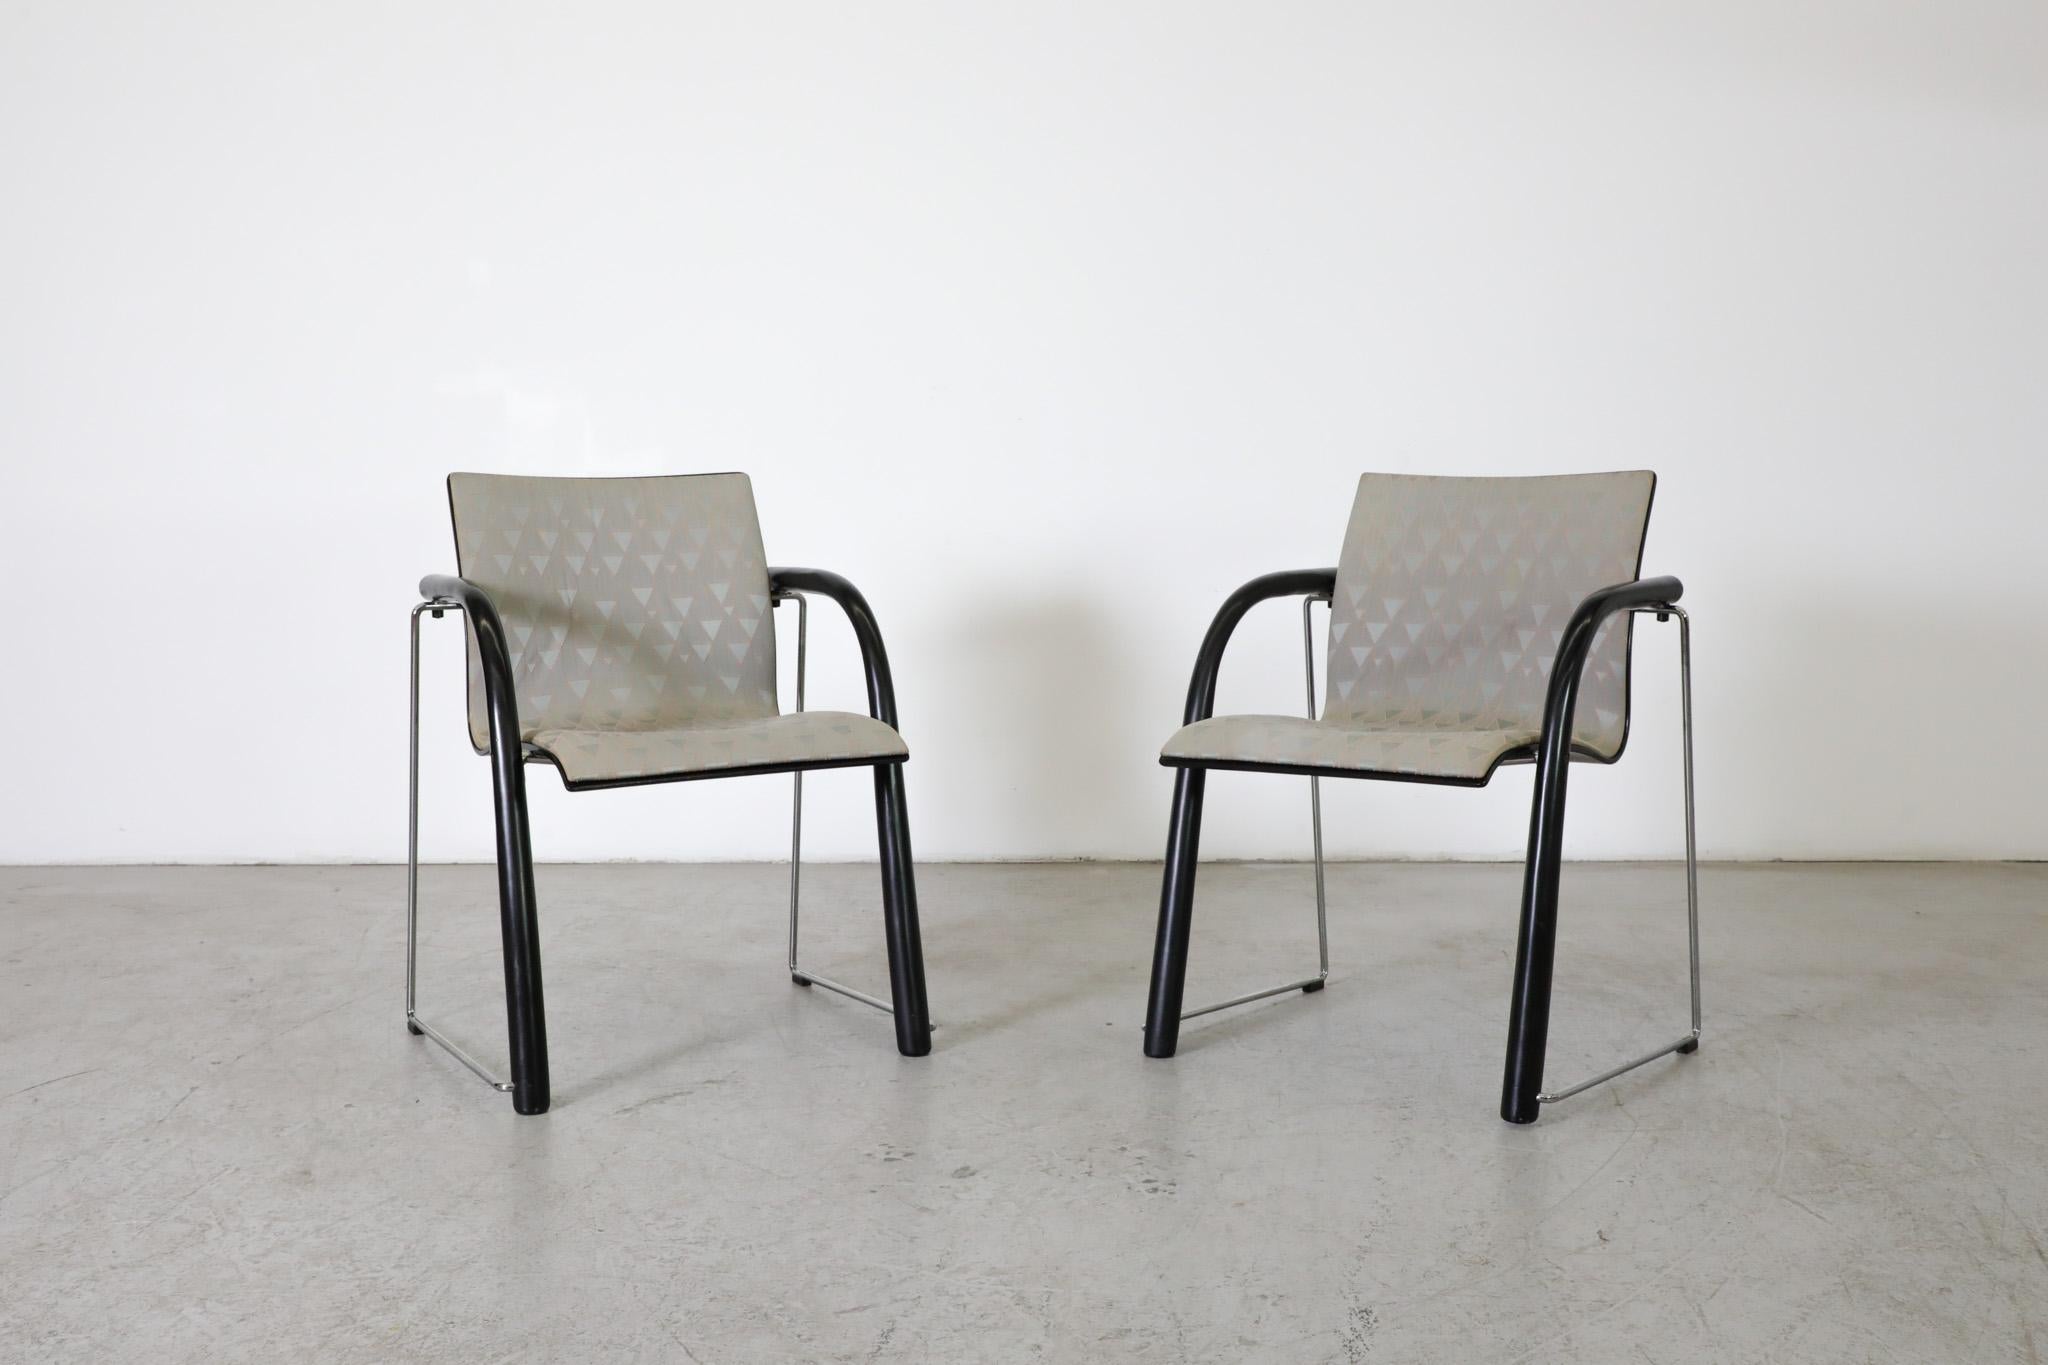 Pair of Thonet S320 by Wulf Schneider & Ulrich Böhme Chairs w/ Black Curved Arms For Sale 10